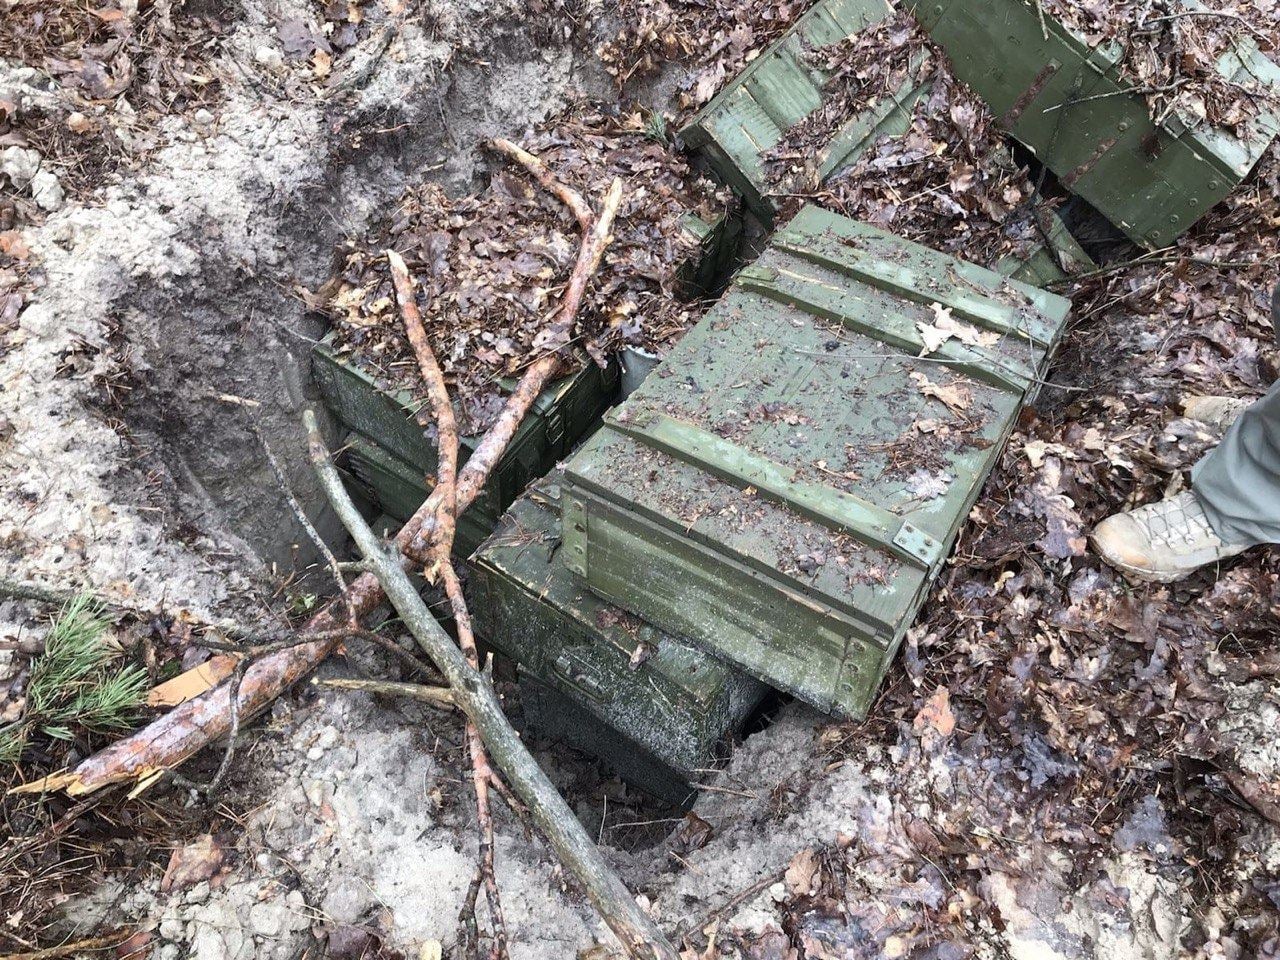 Defense Express / Ukrainian Militarty Police has found vehicles and ammos, abandoned by Russians as they retreated from the occupied territories / Day 42nd of War Between Ukraine and Russian Federation (Live Updates)